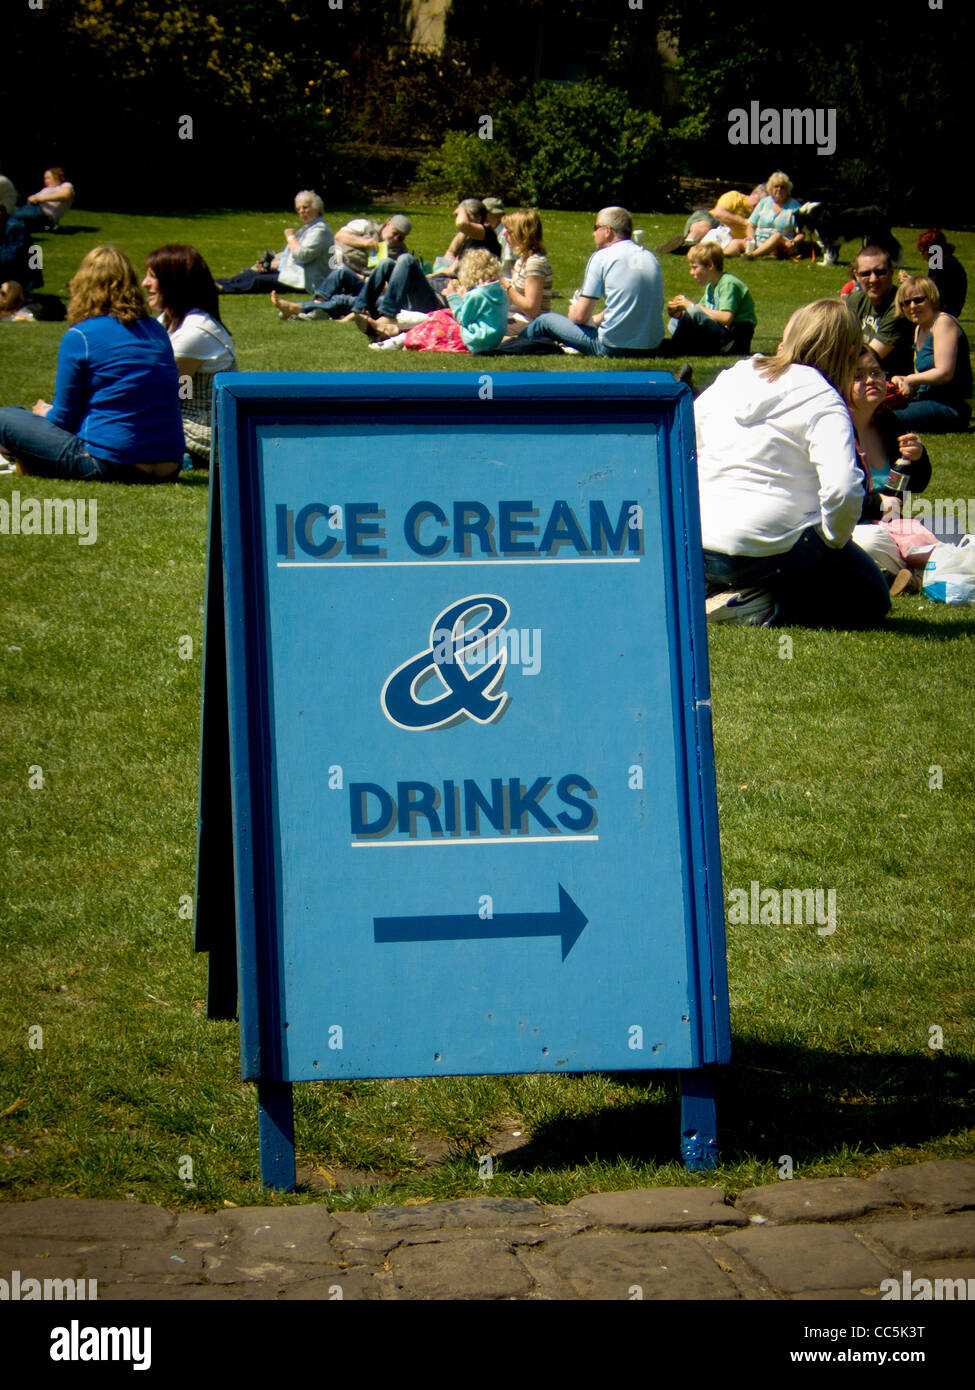 People sitting on the grass in a public green space, in summer, with an A-board in the foreground with directions for ice cream and drinks. Stock Photo